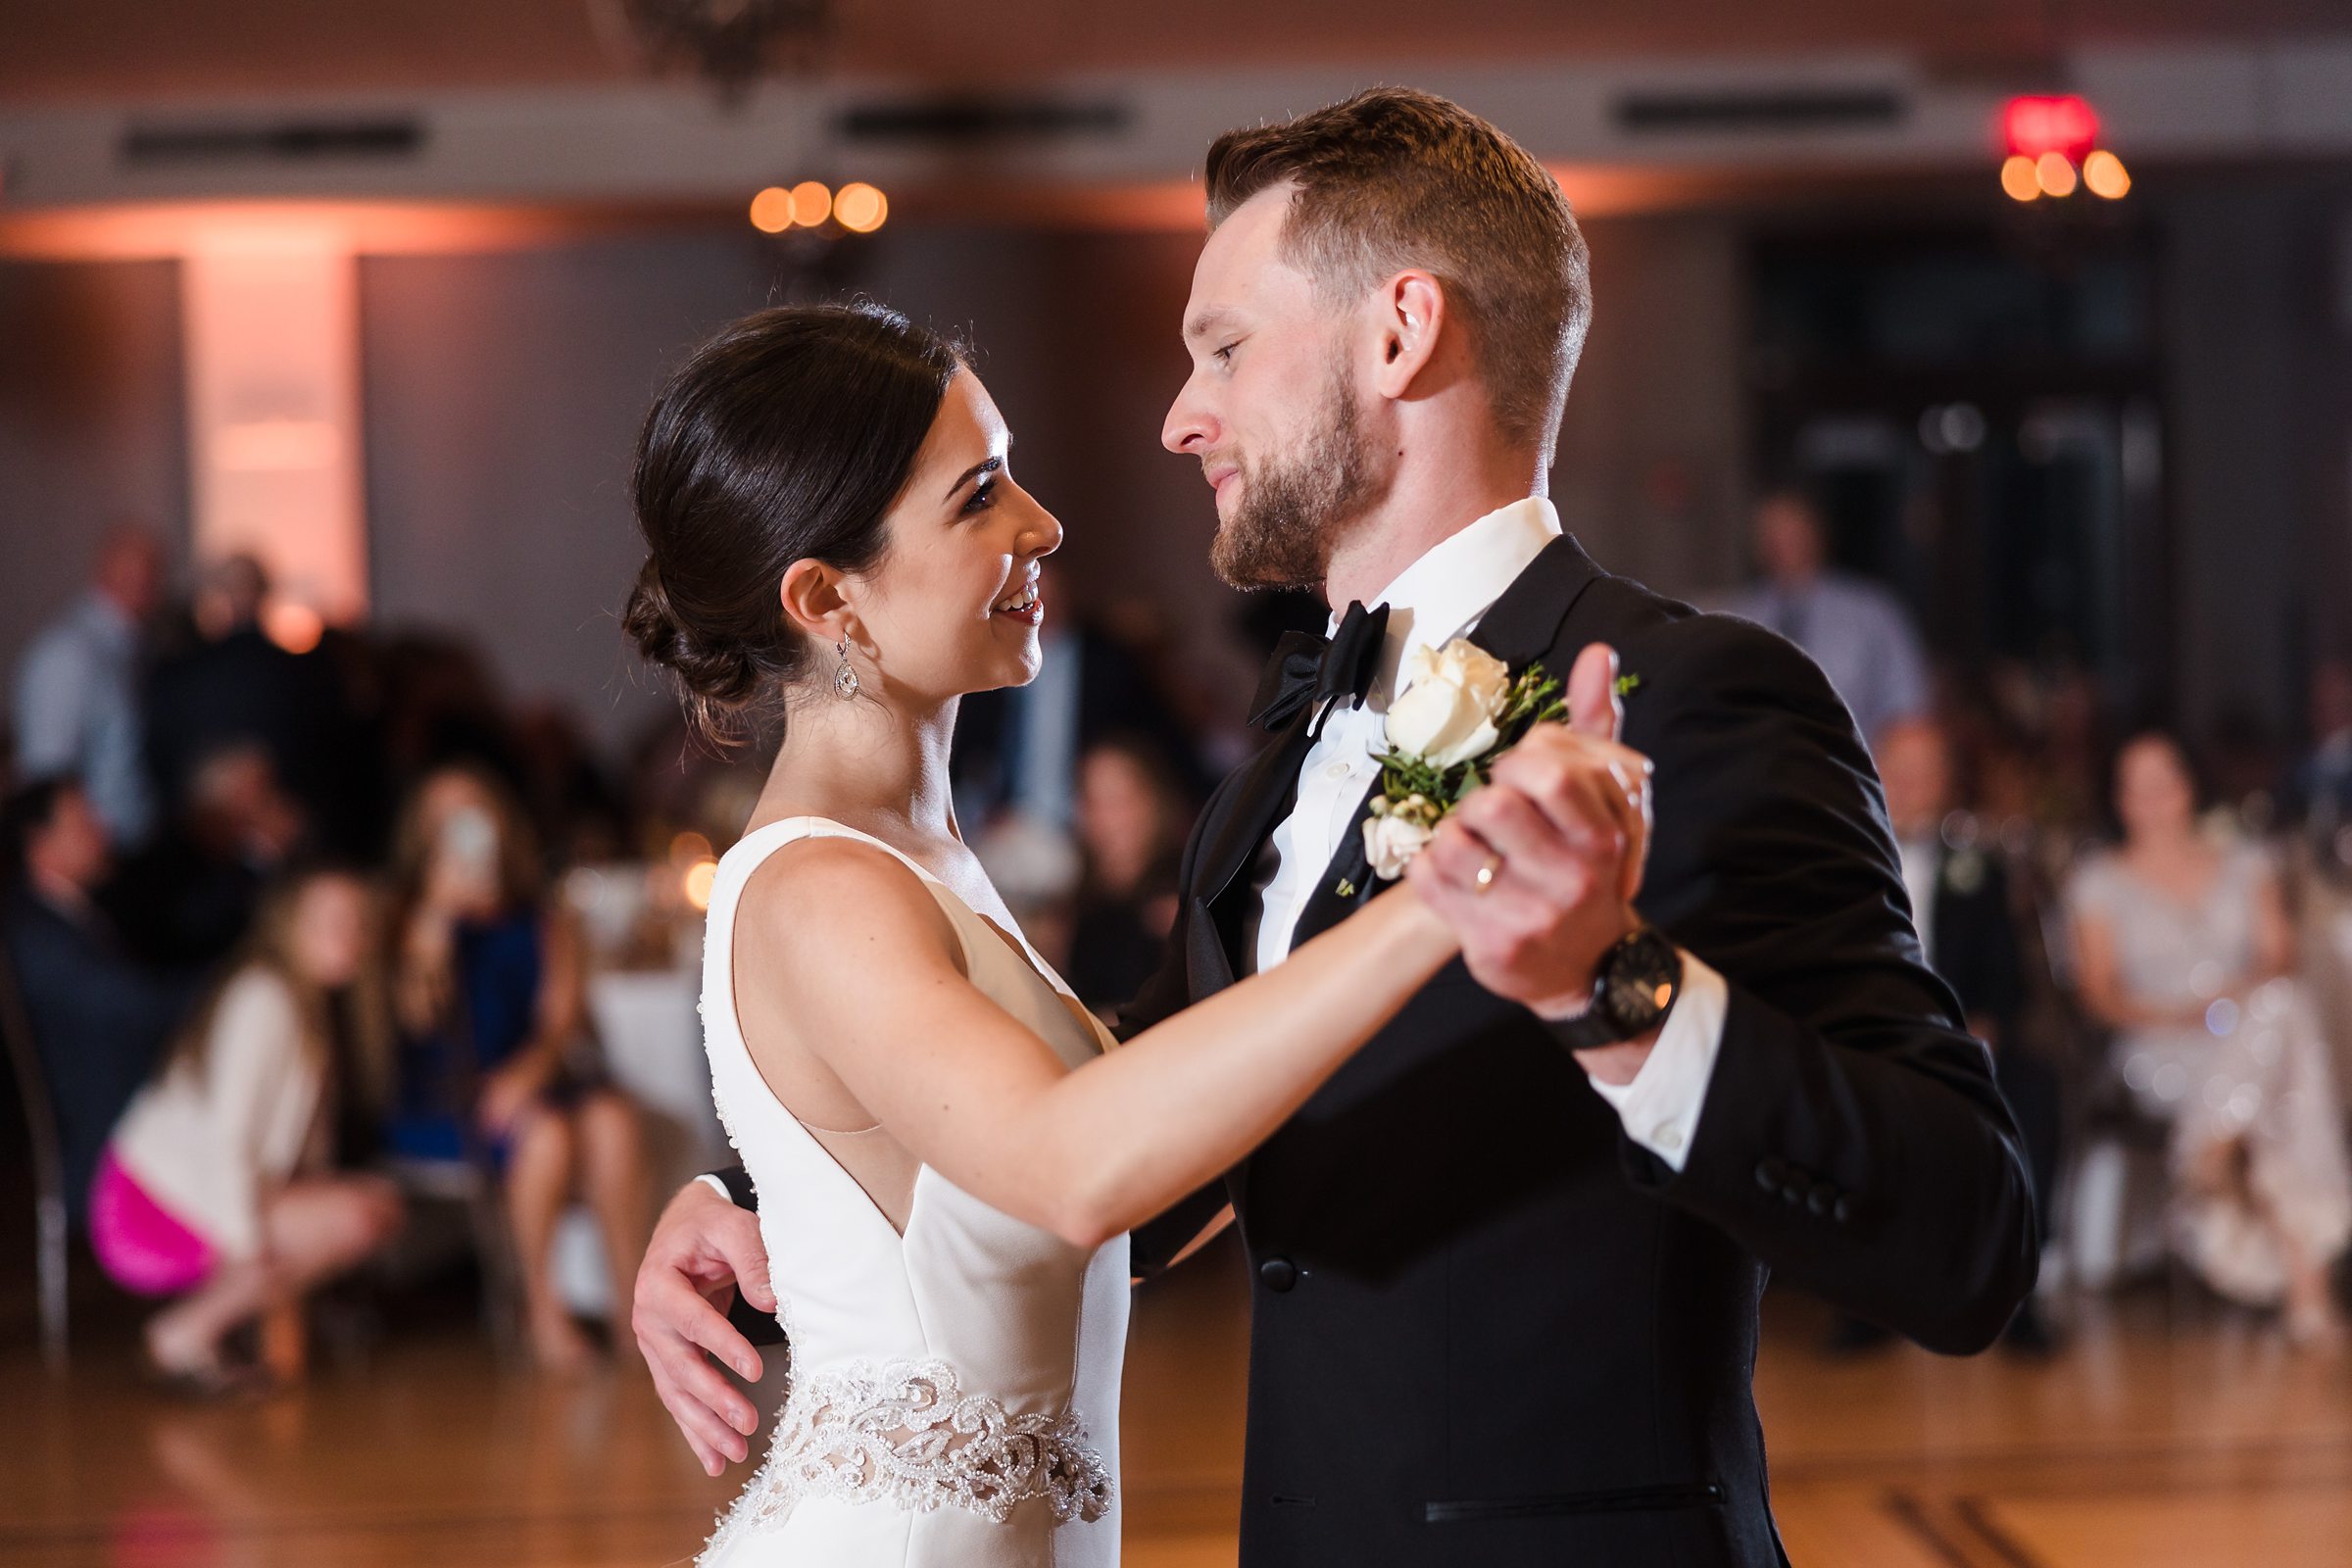 Bride and groom share their first dance during their wedding at the Chevy Chase Country Club in Wheeling, Illinois.